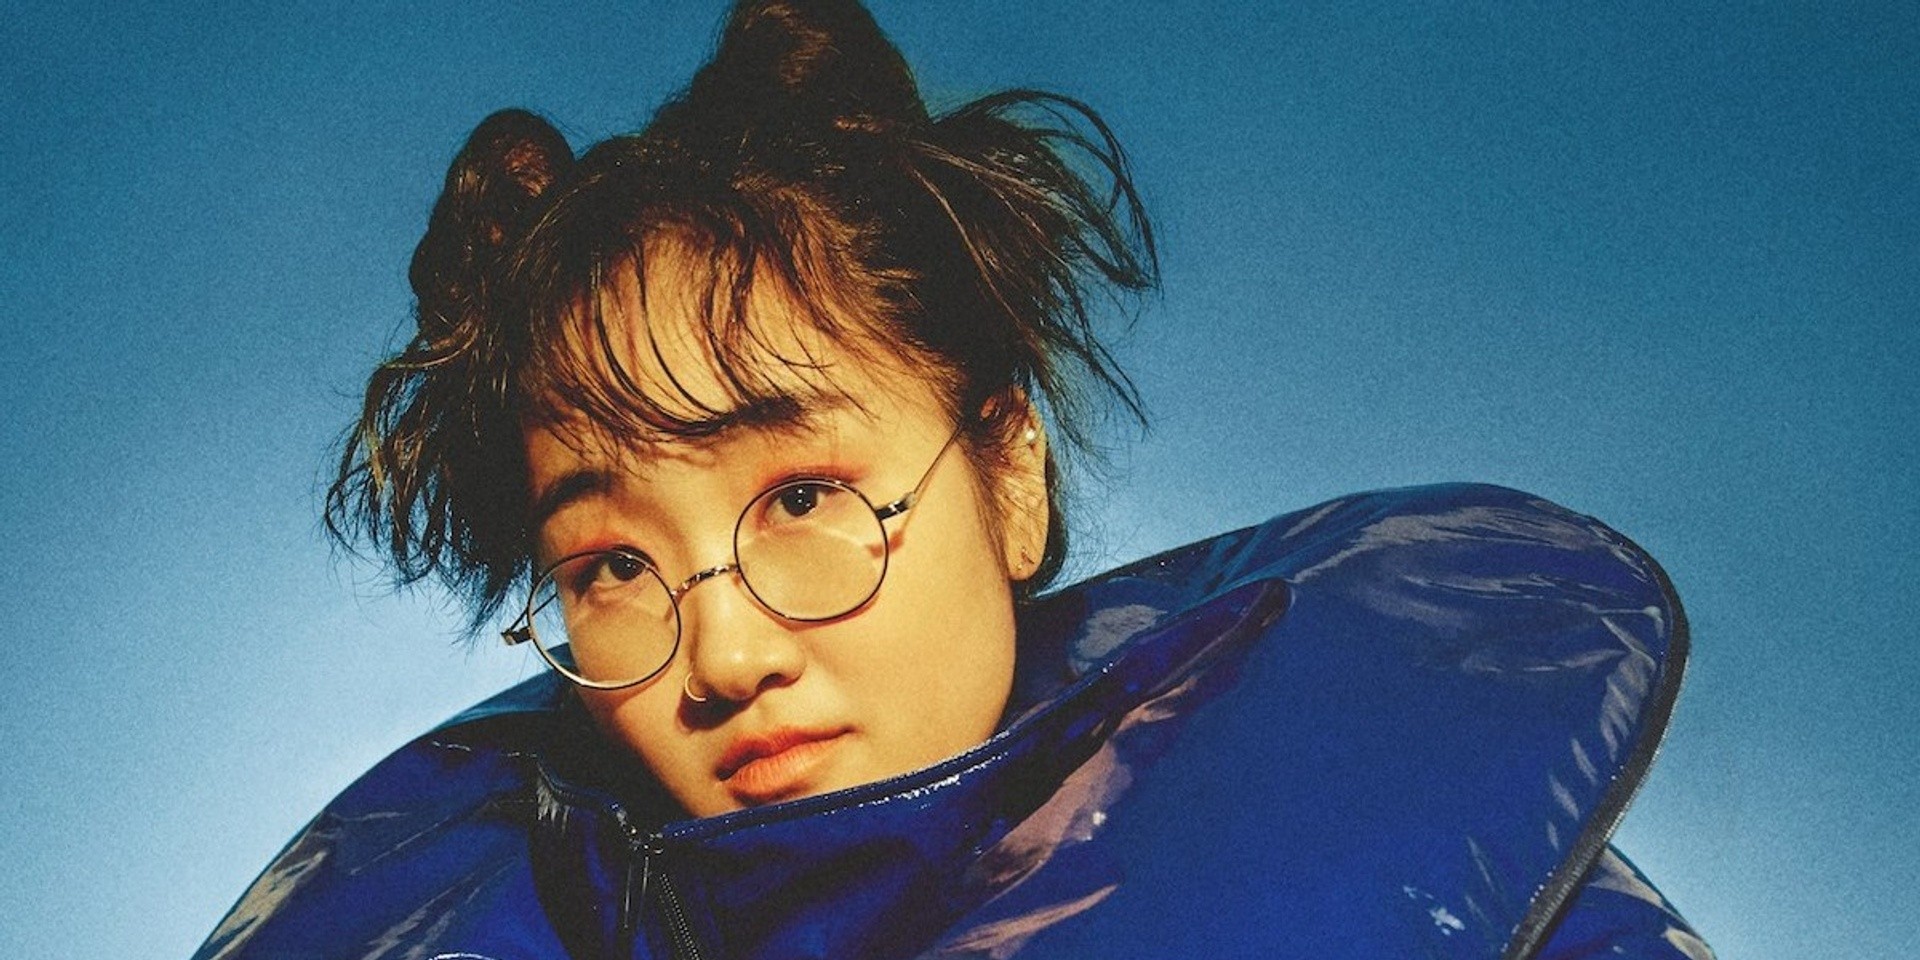 YAEJI to perform in Singapore this July